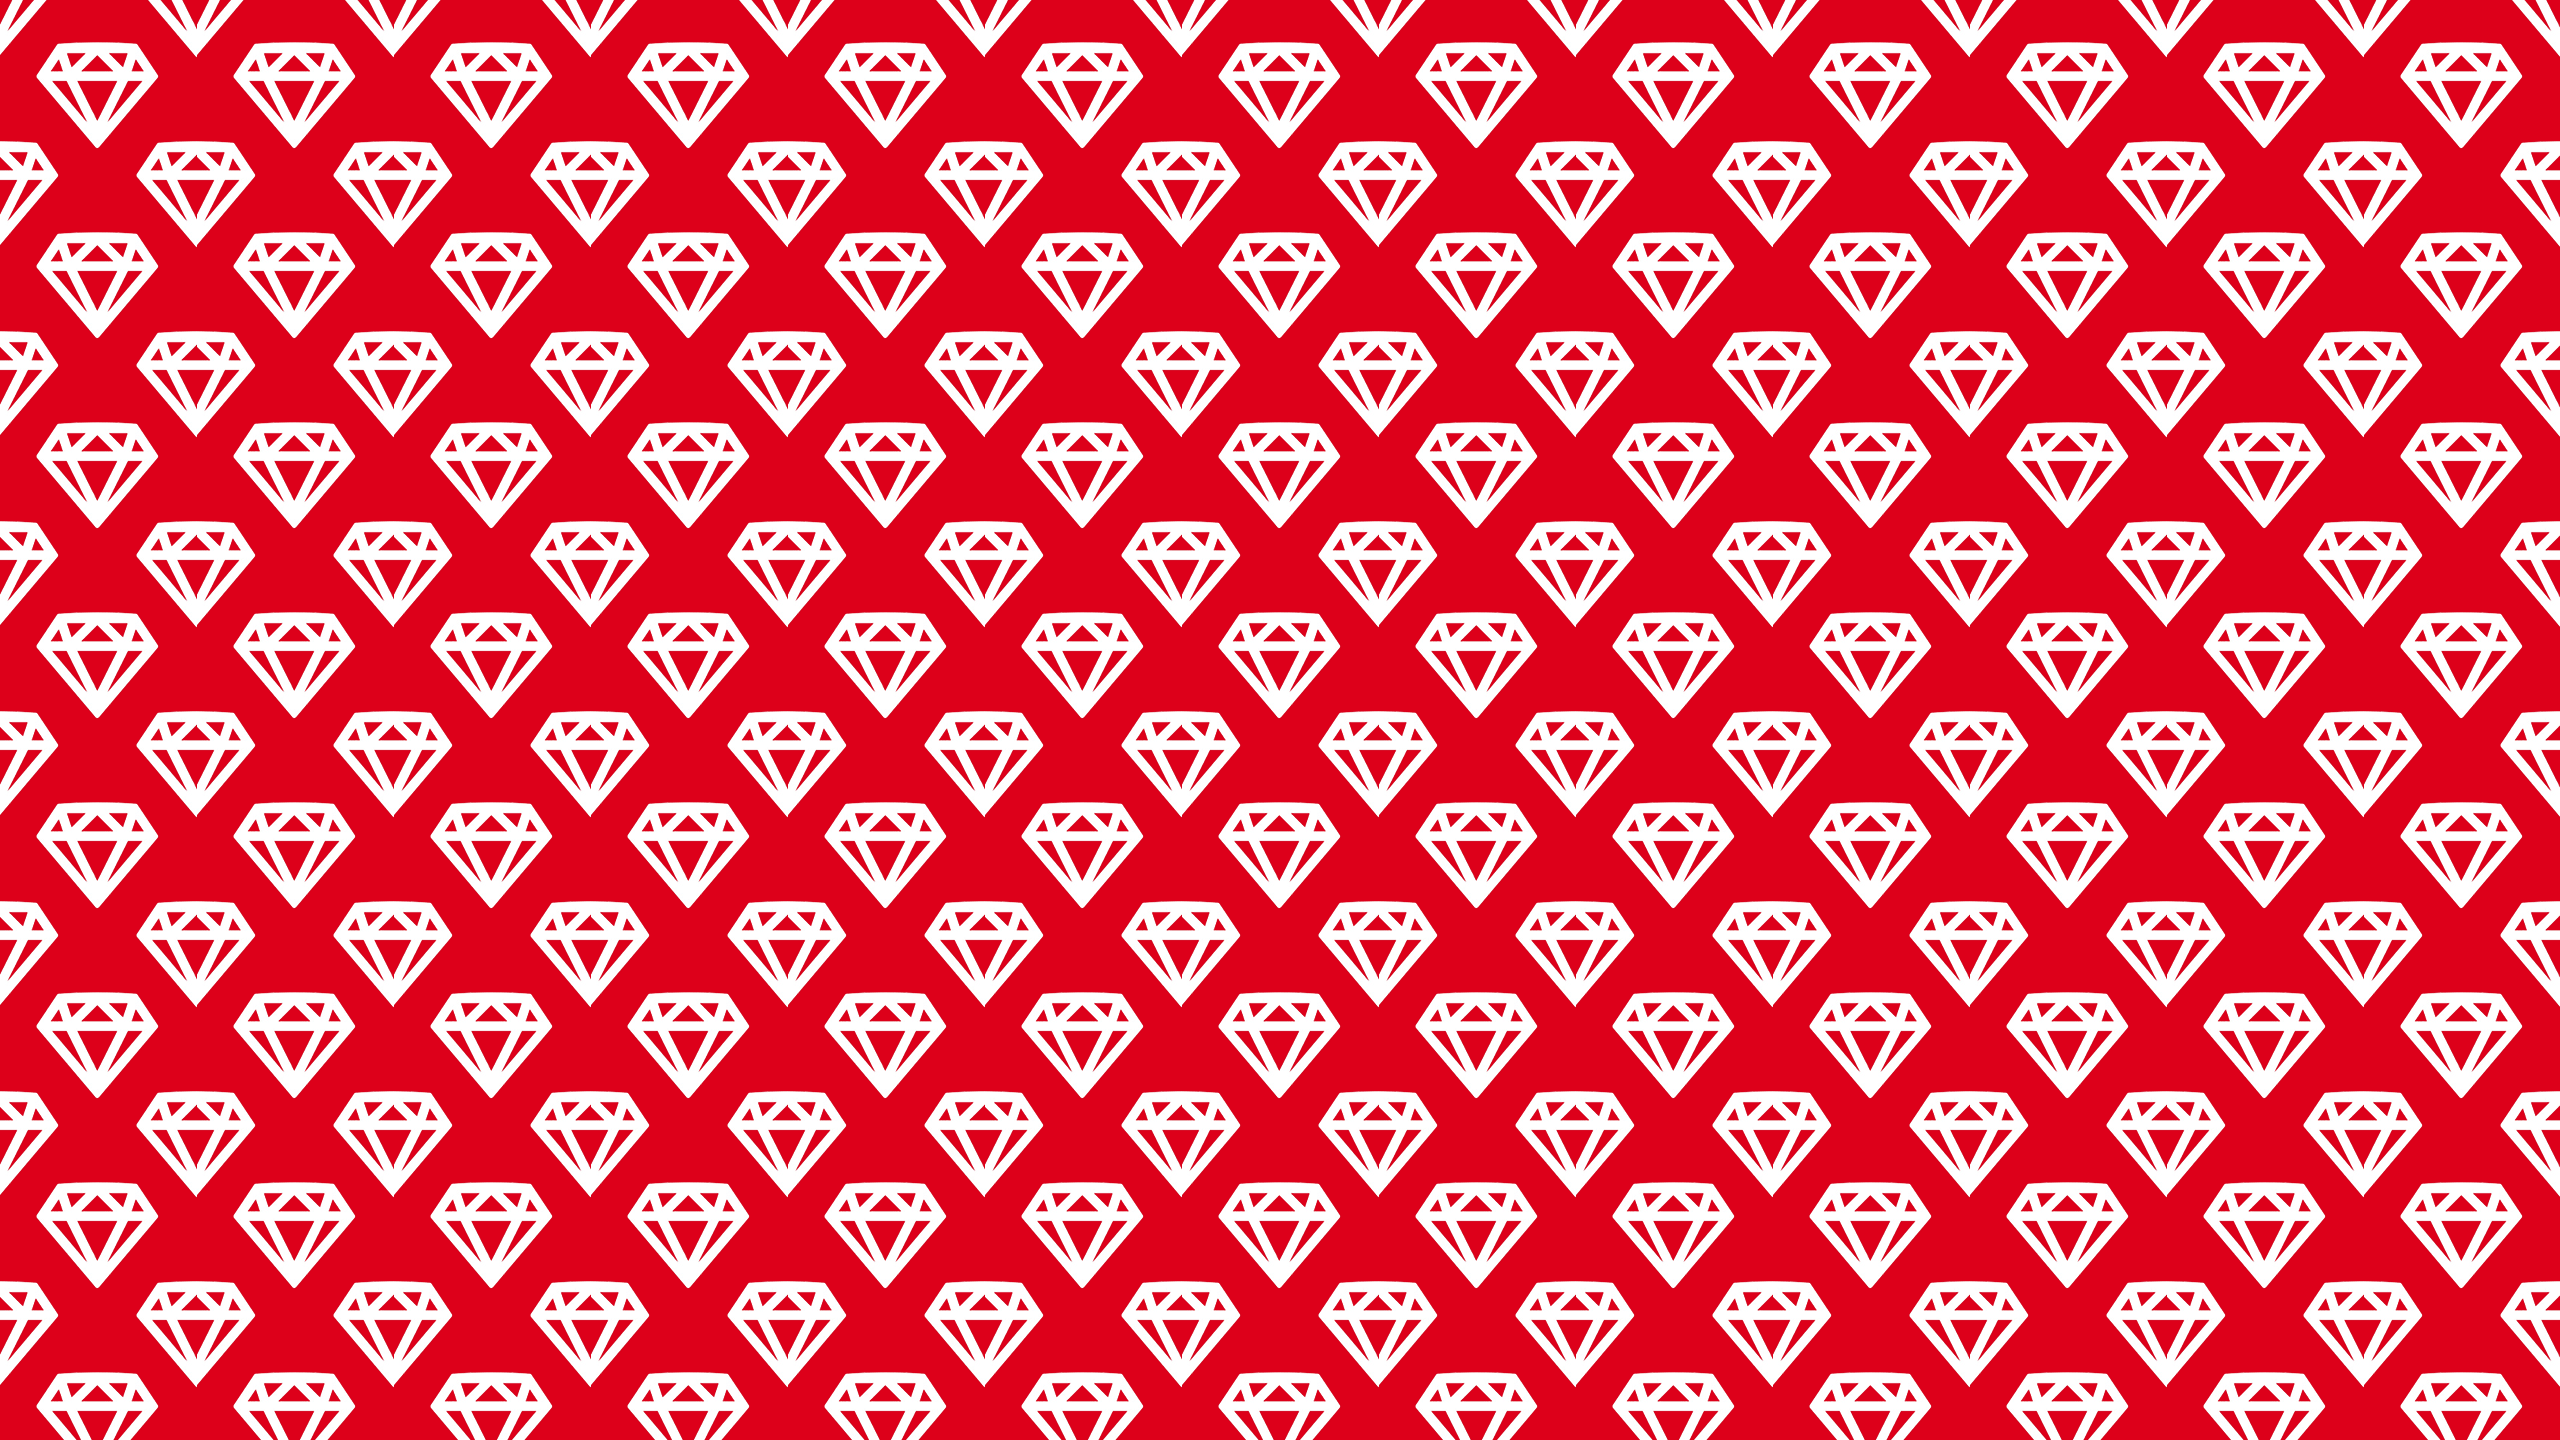 Red White Diamonds Desktop Wallpaper Is Easy Just Save The